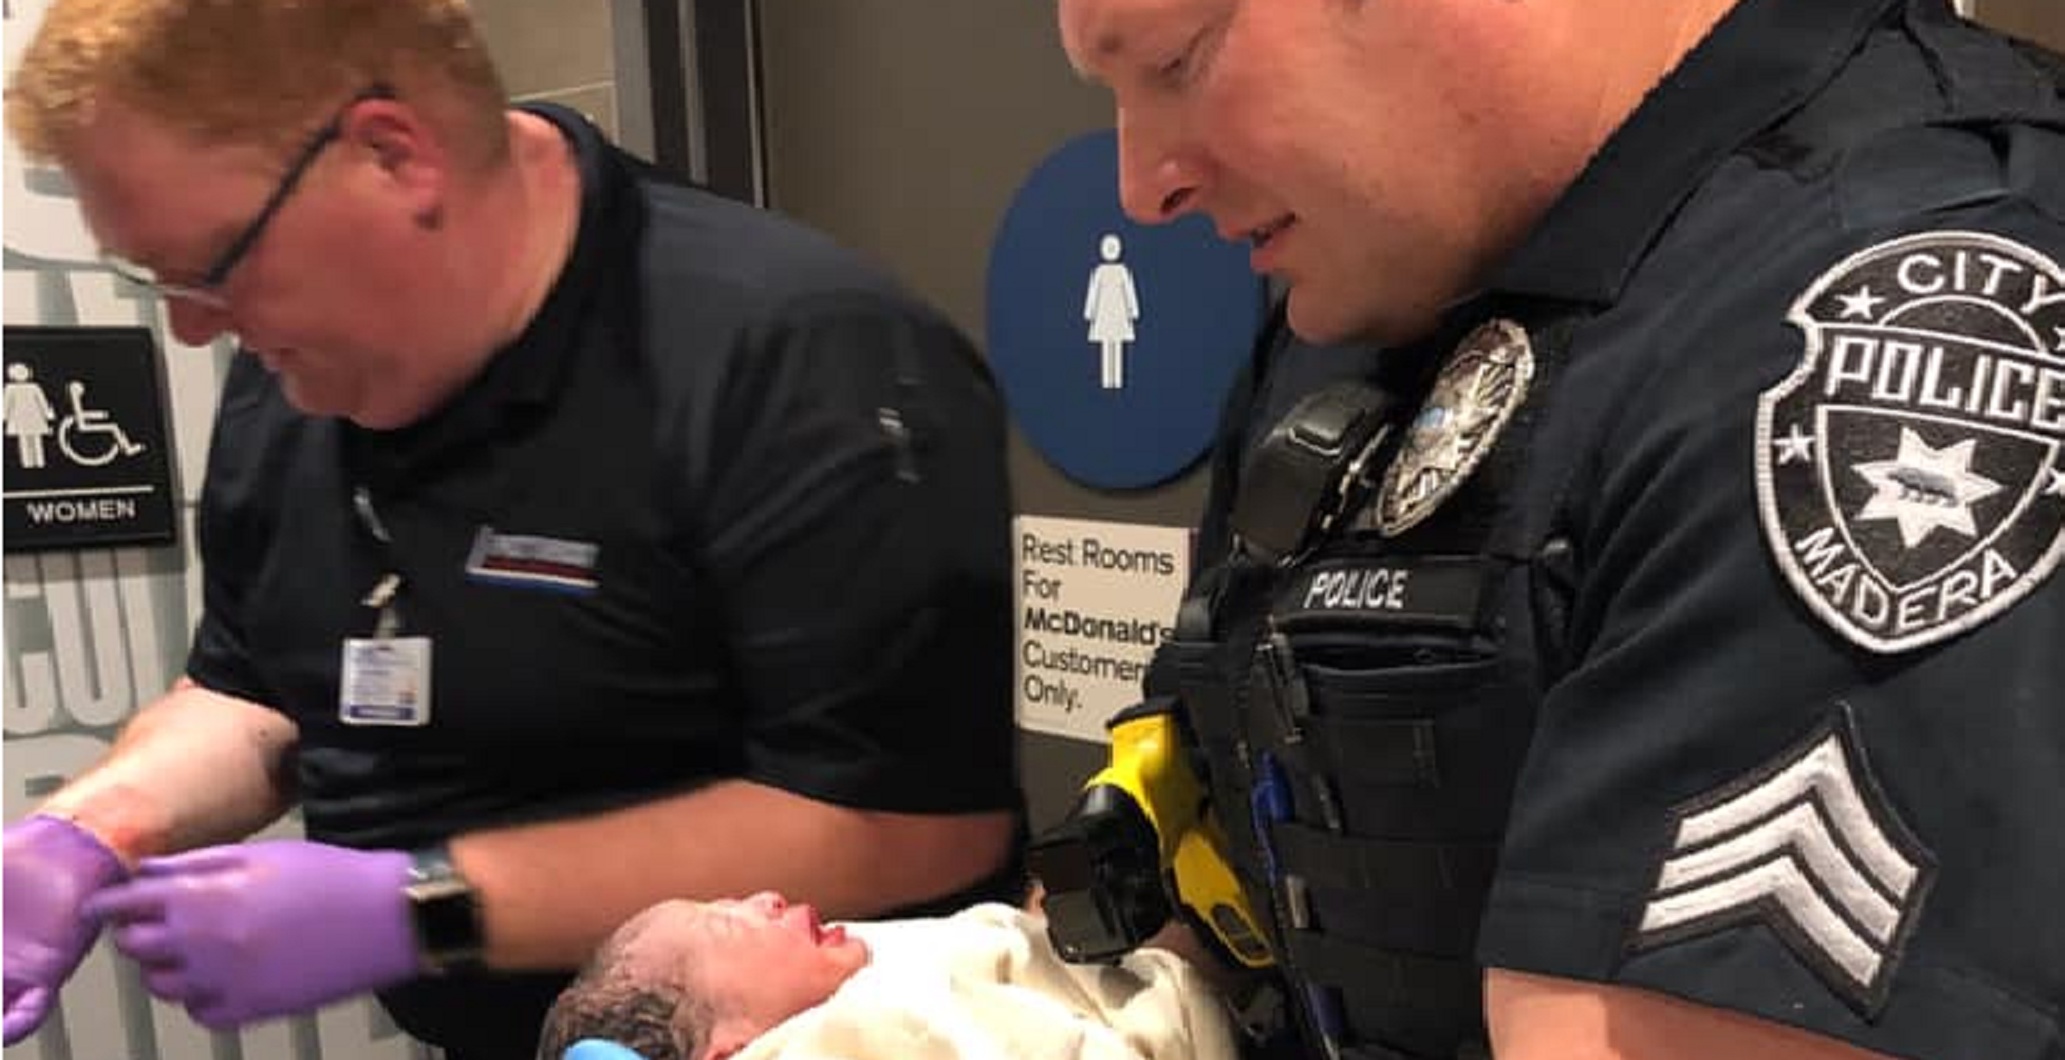 McDonald’s Lobby Turns Into Delivery Room After Female Customer Goes Into Labour